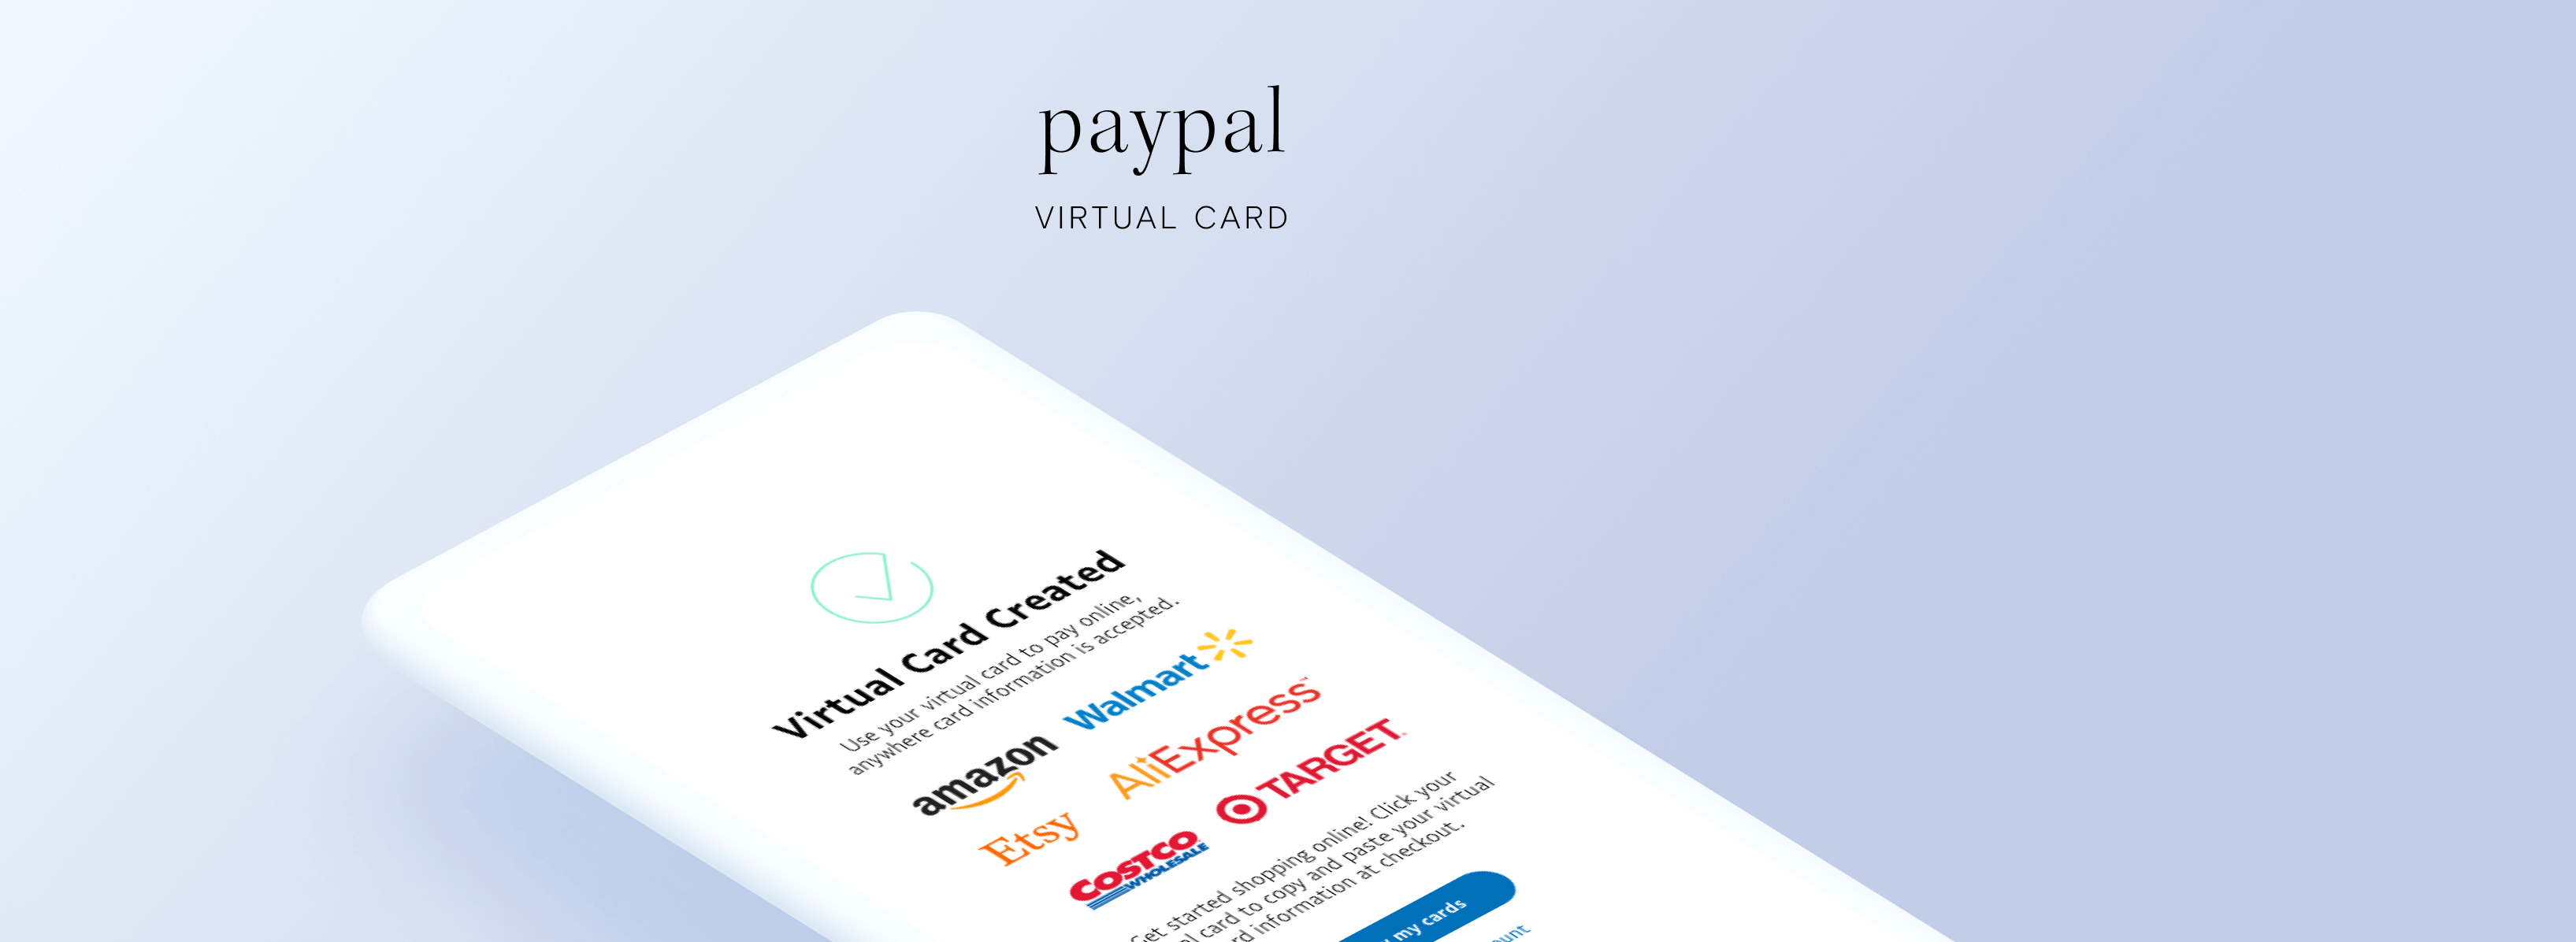 paypal-cover-iso-comp